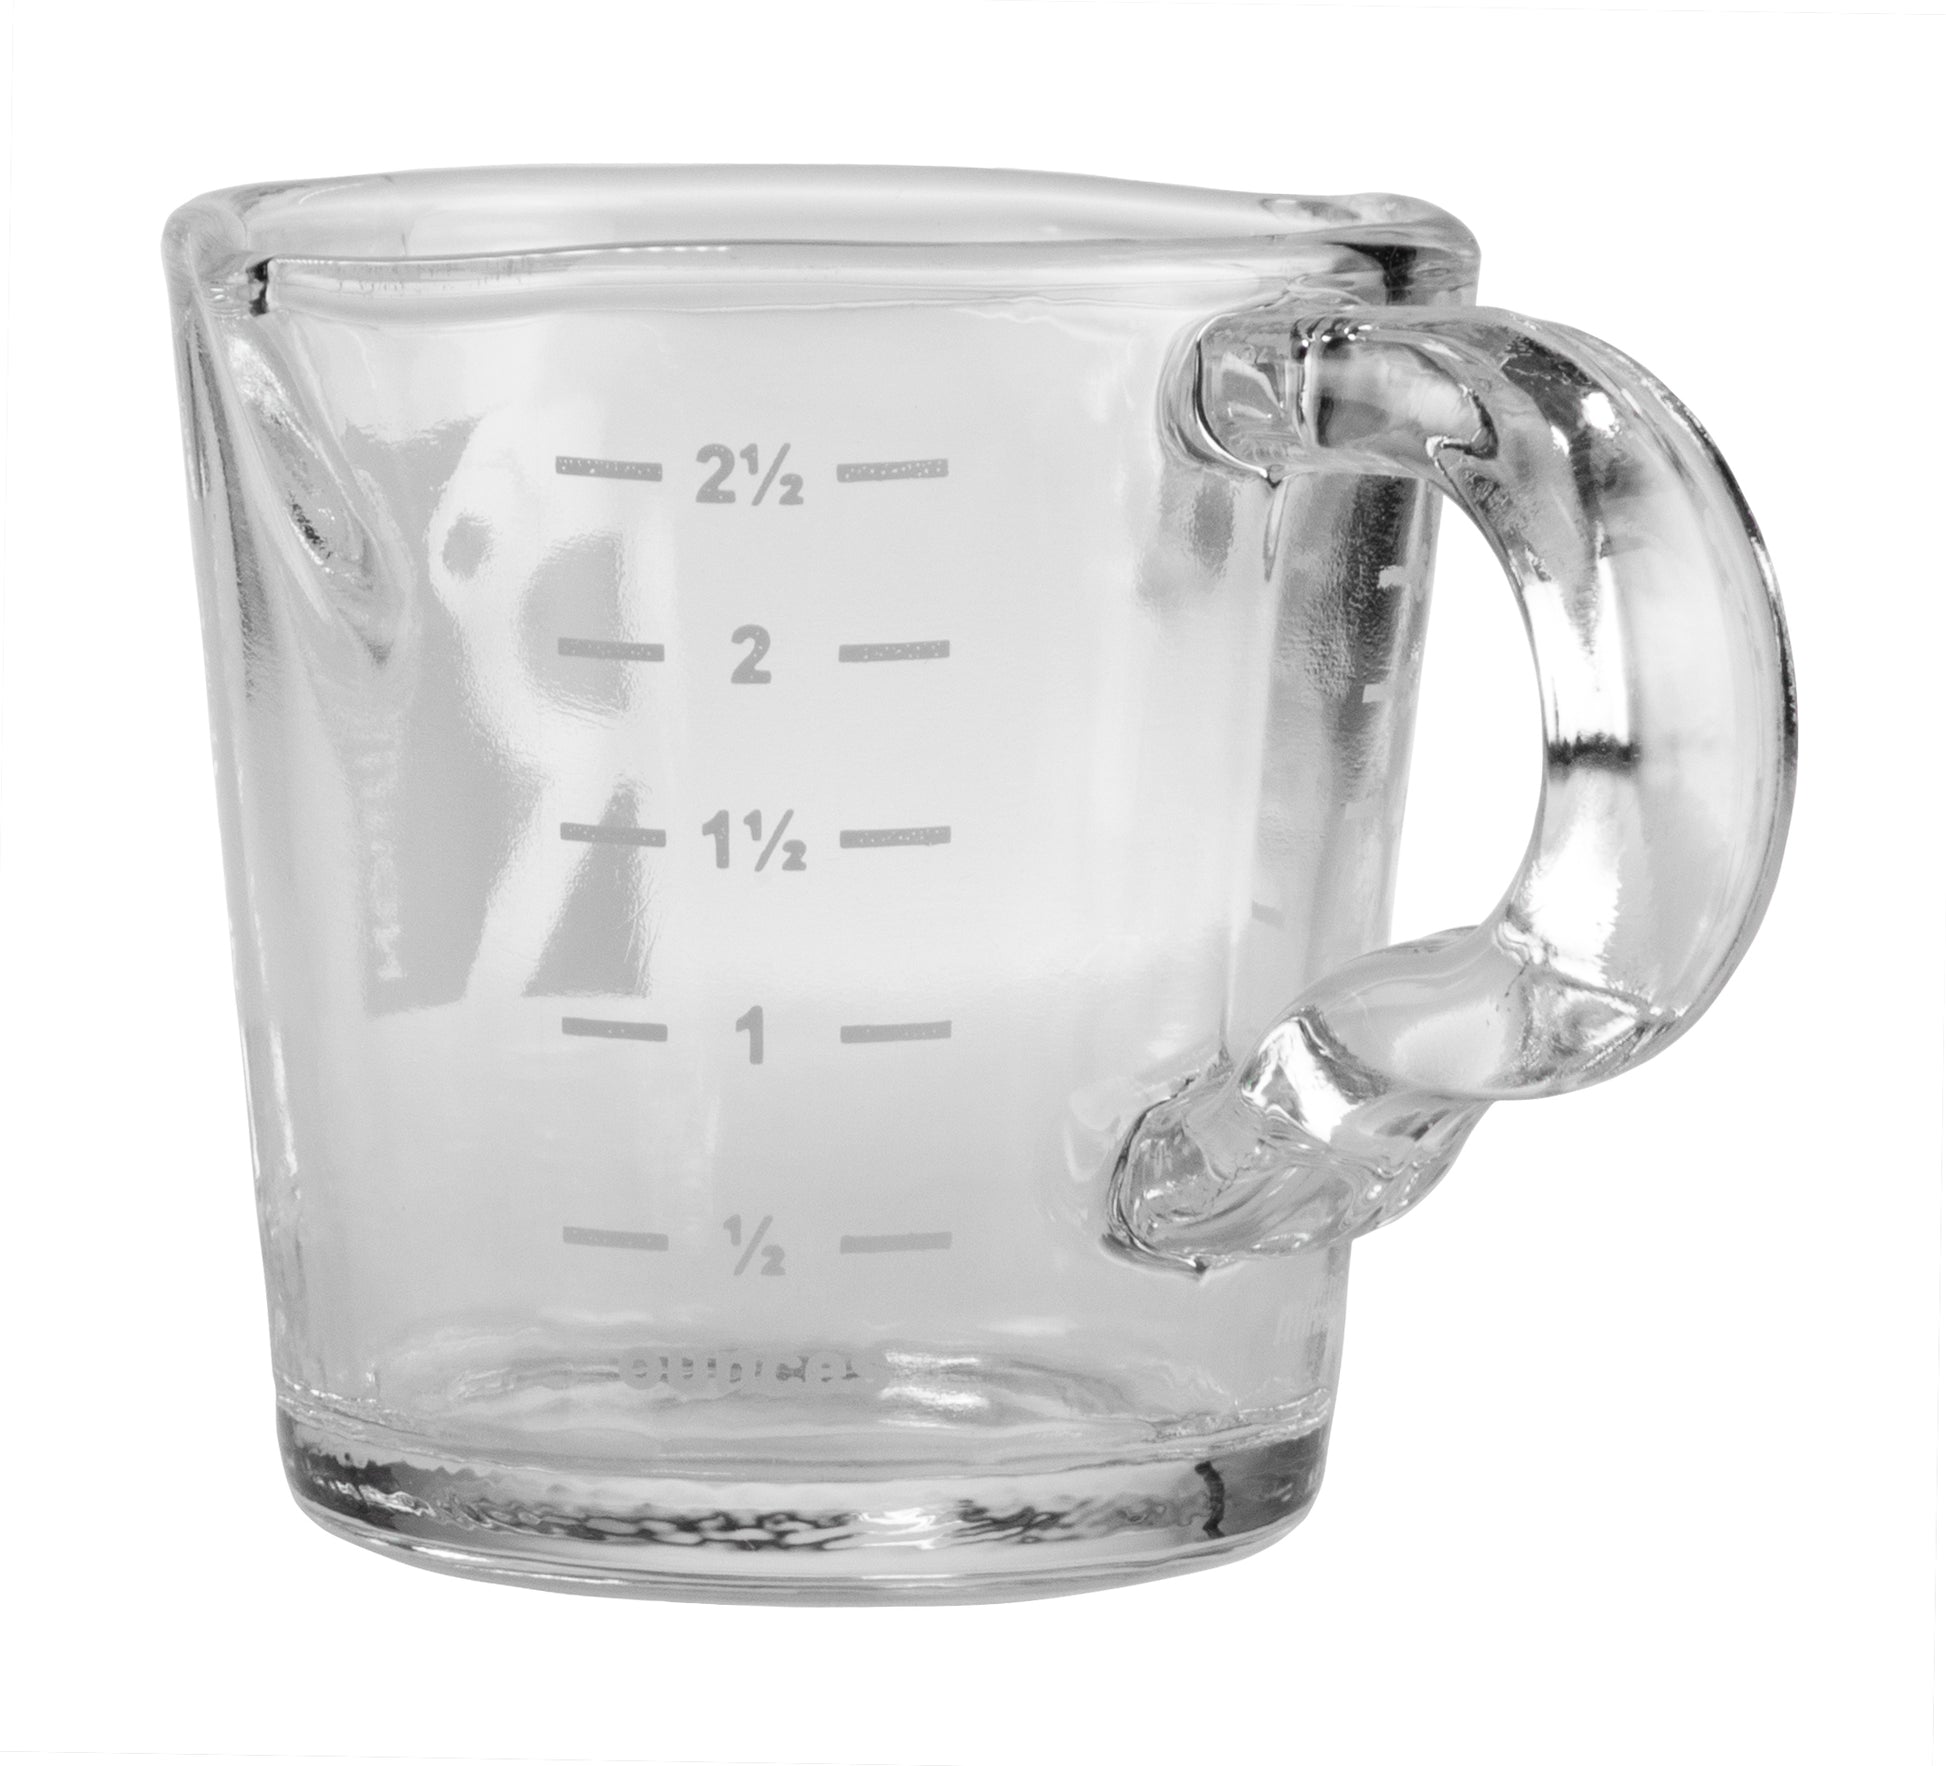 Espresso Shot Glass Measuring Cup with Double Spouts and Heat